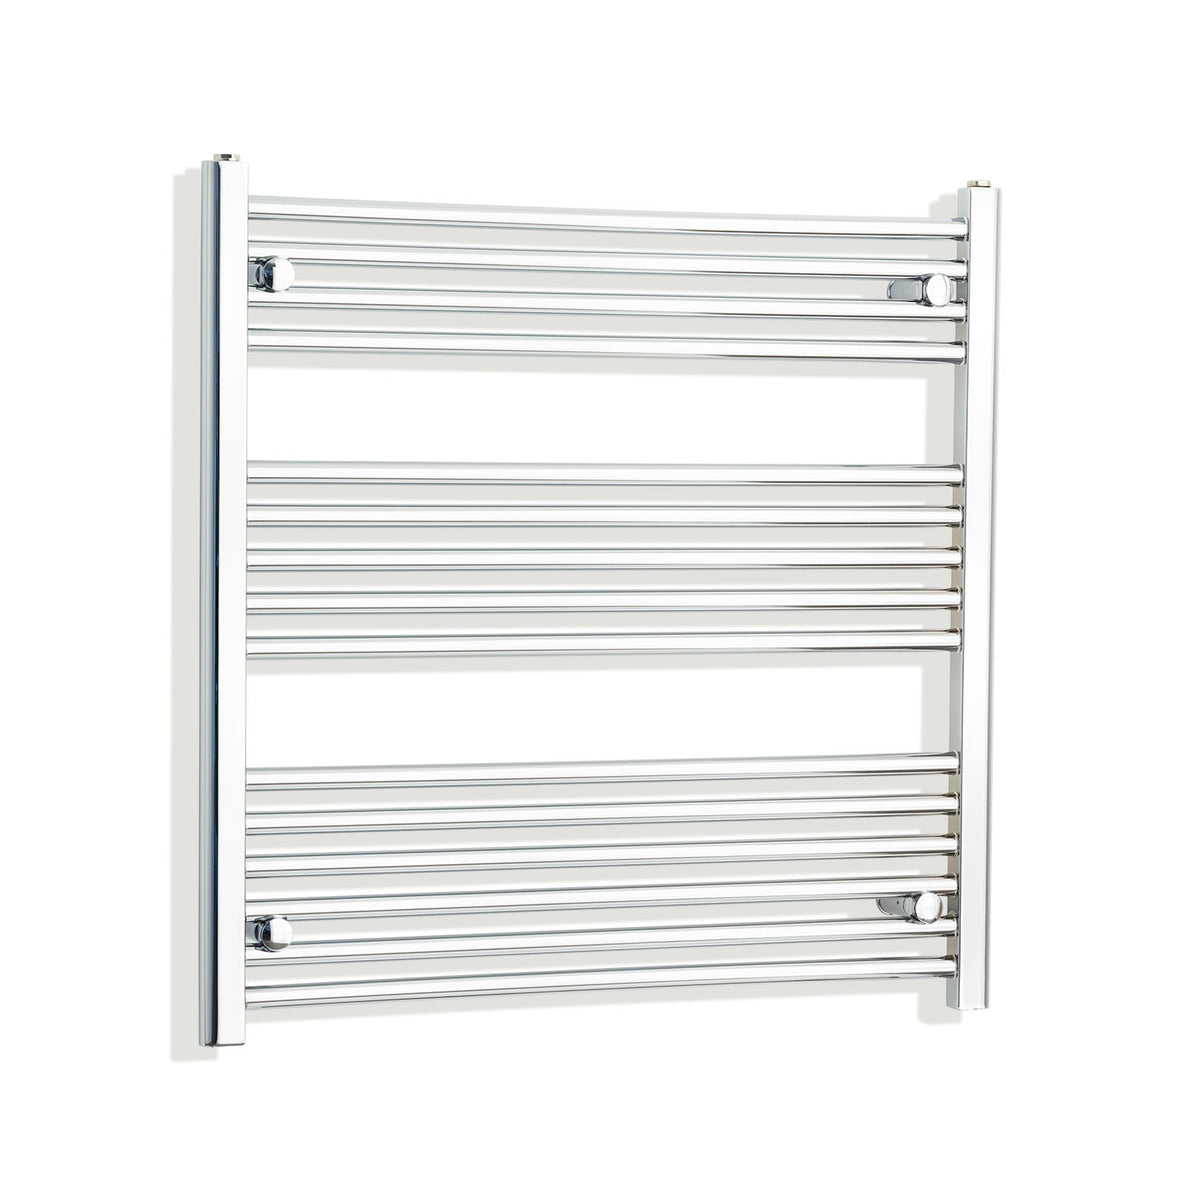 mm High 900 mm Towel Rail Central Heating